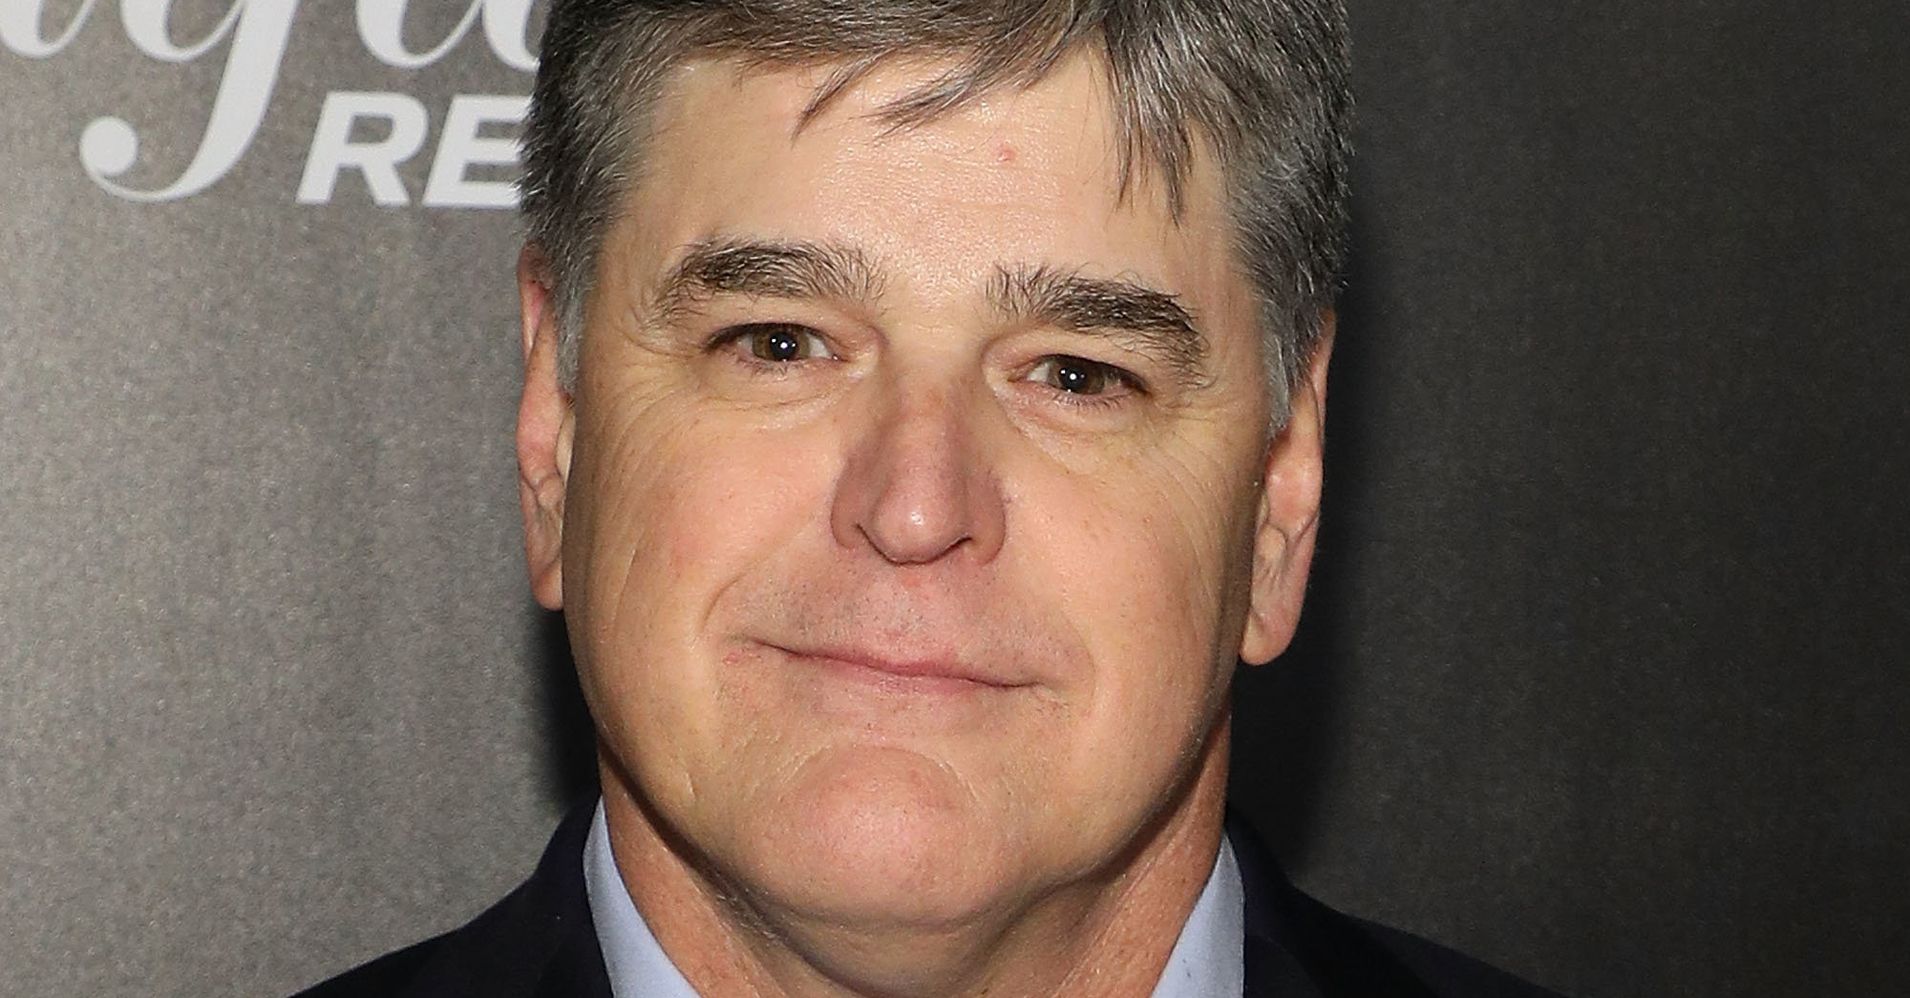 Sean Hannity Just Let Trump's Lawyers Host His Radio Show | HuffPost